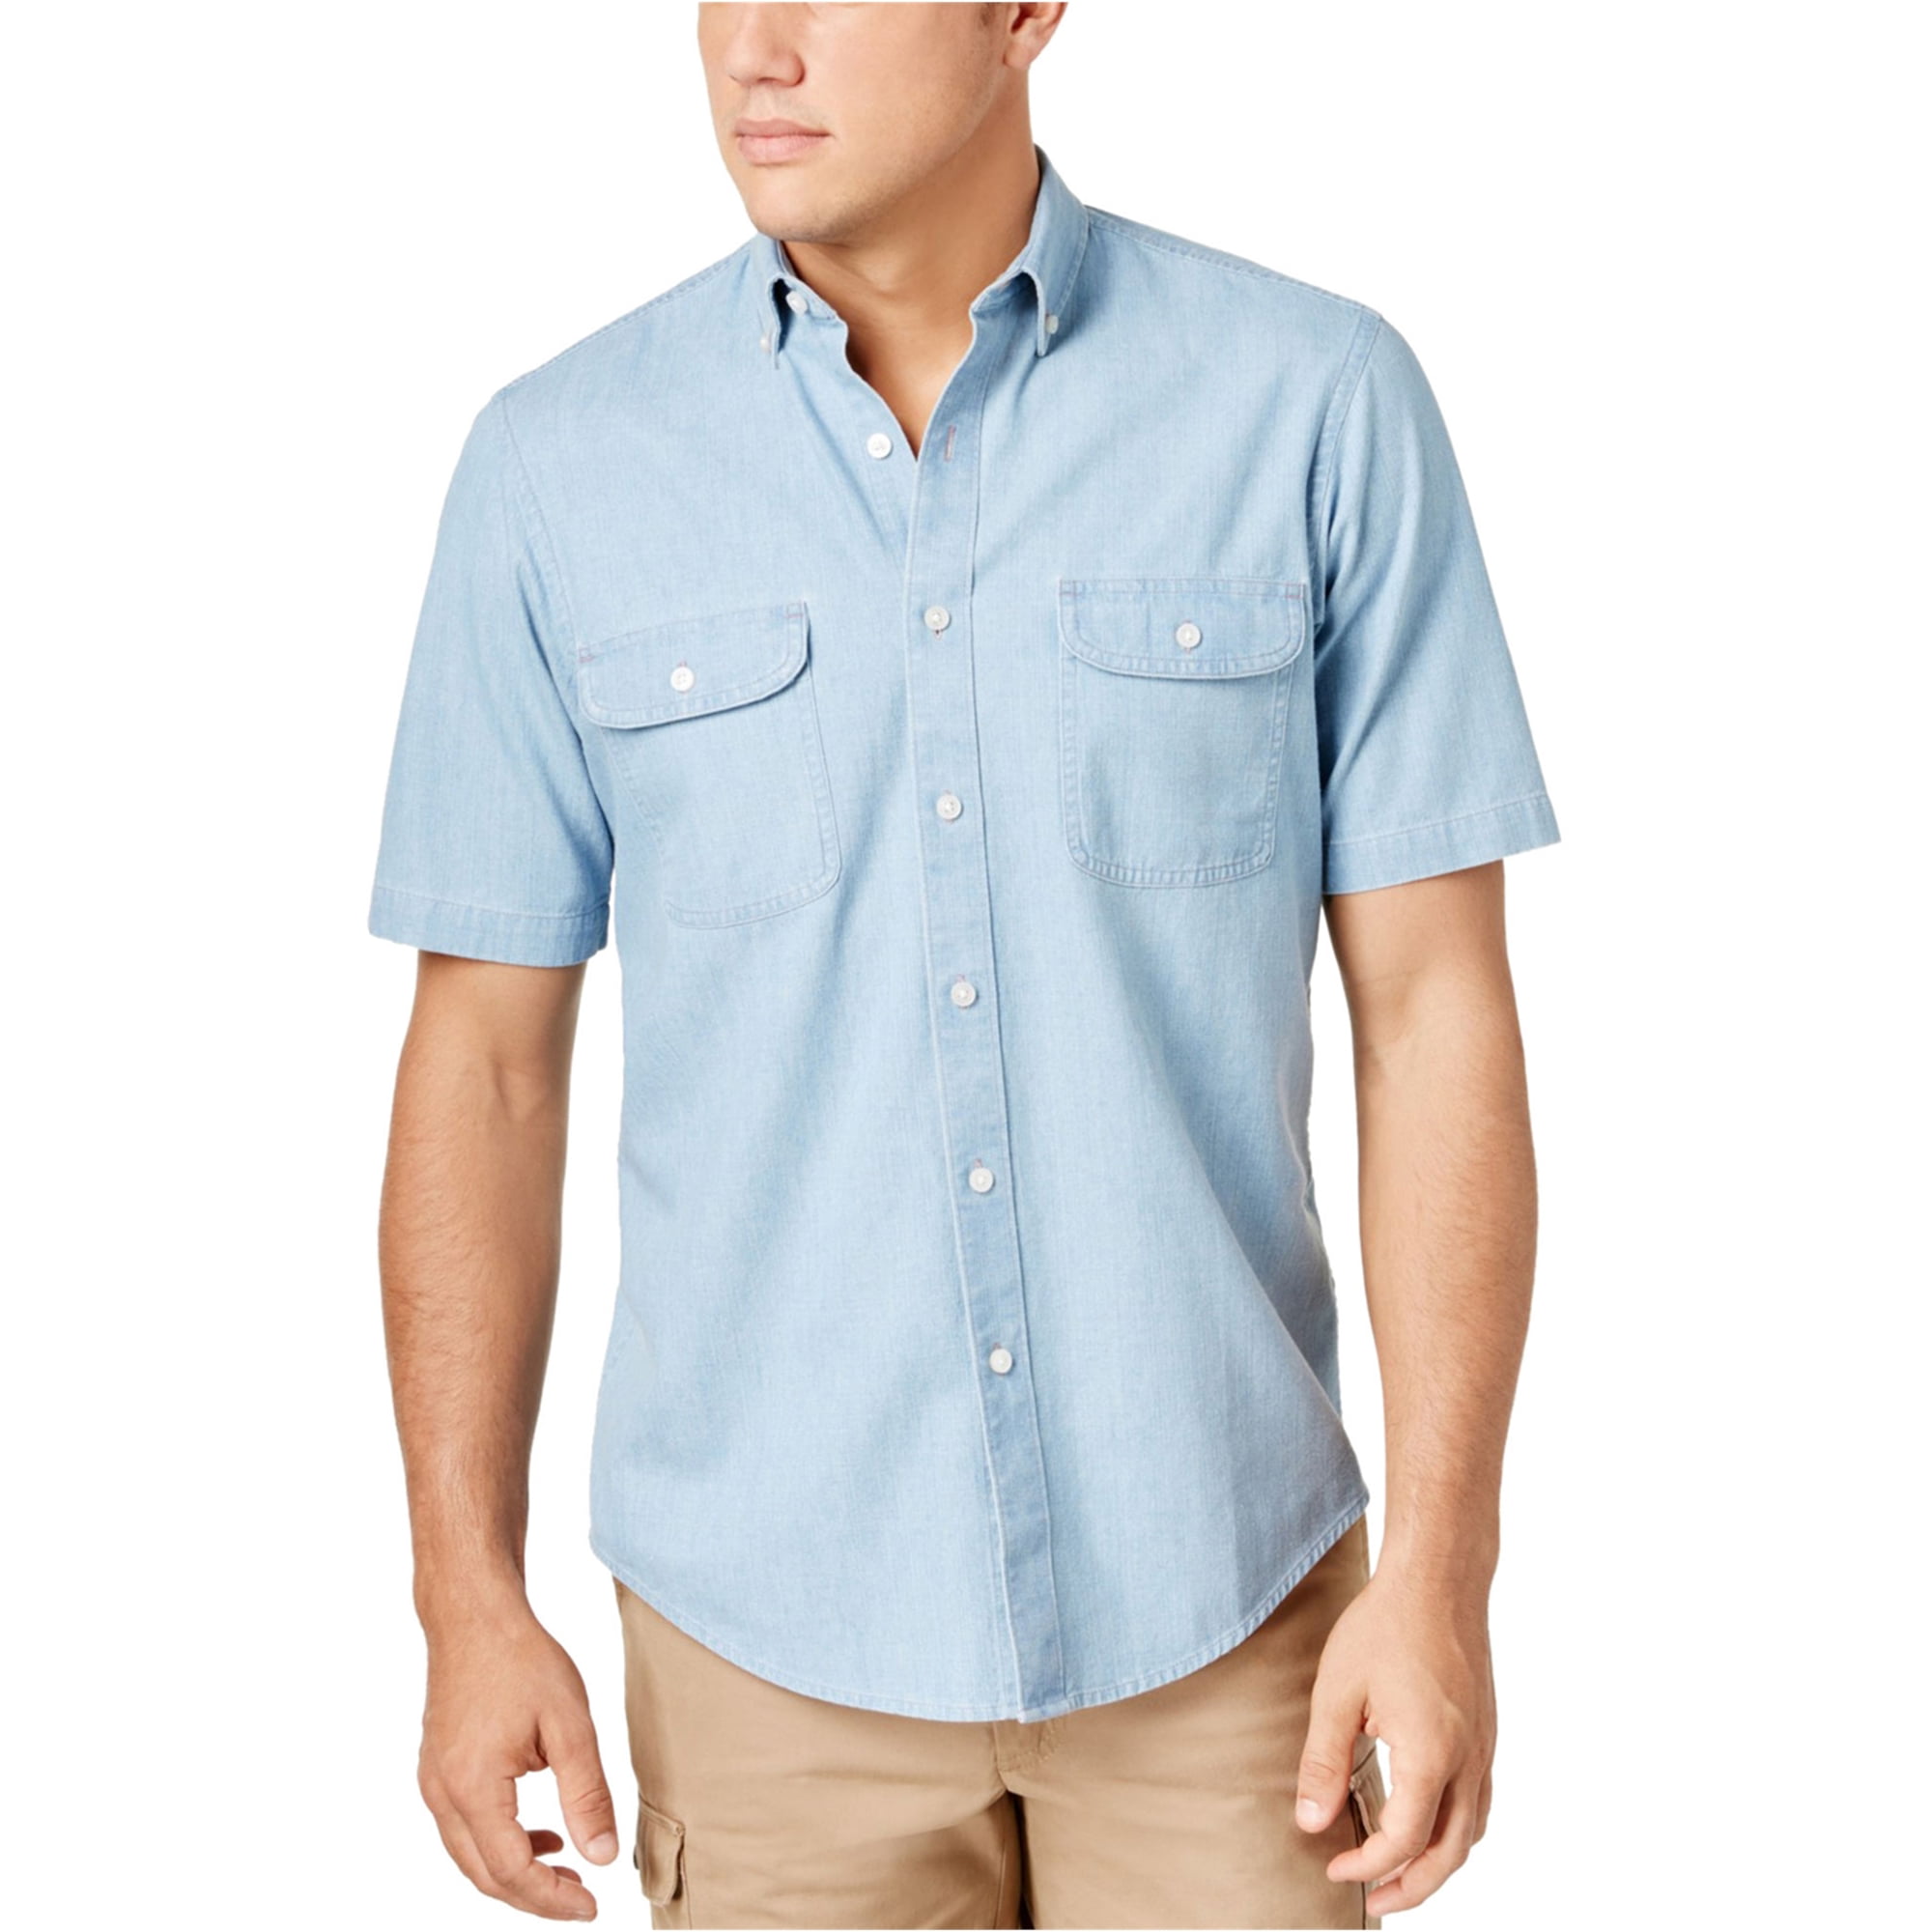 Club Room Mens Two-Pocket Button Up Shirt, Blue, Small